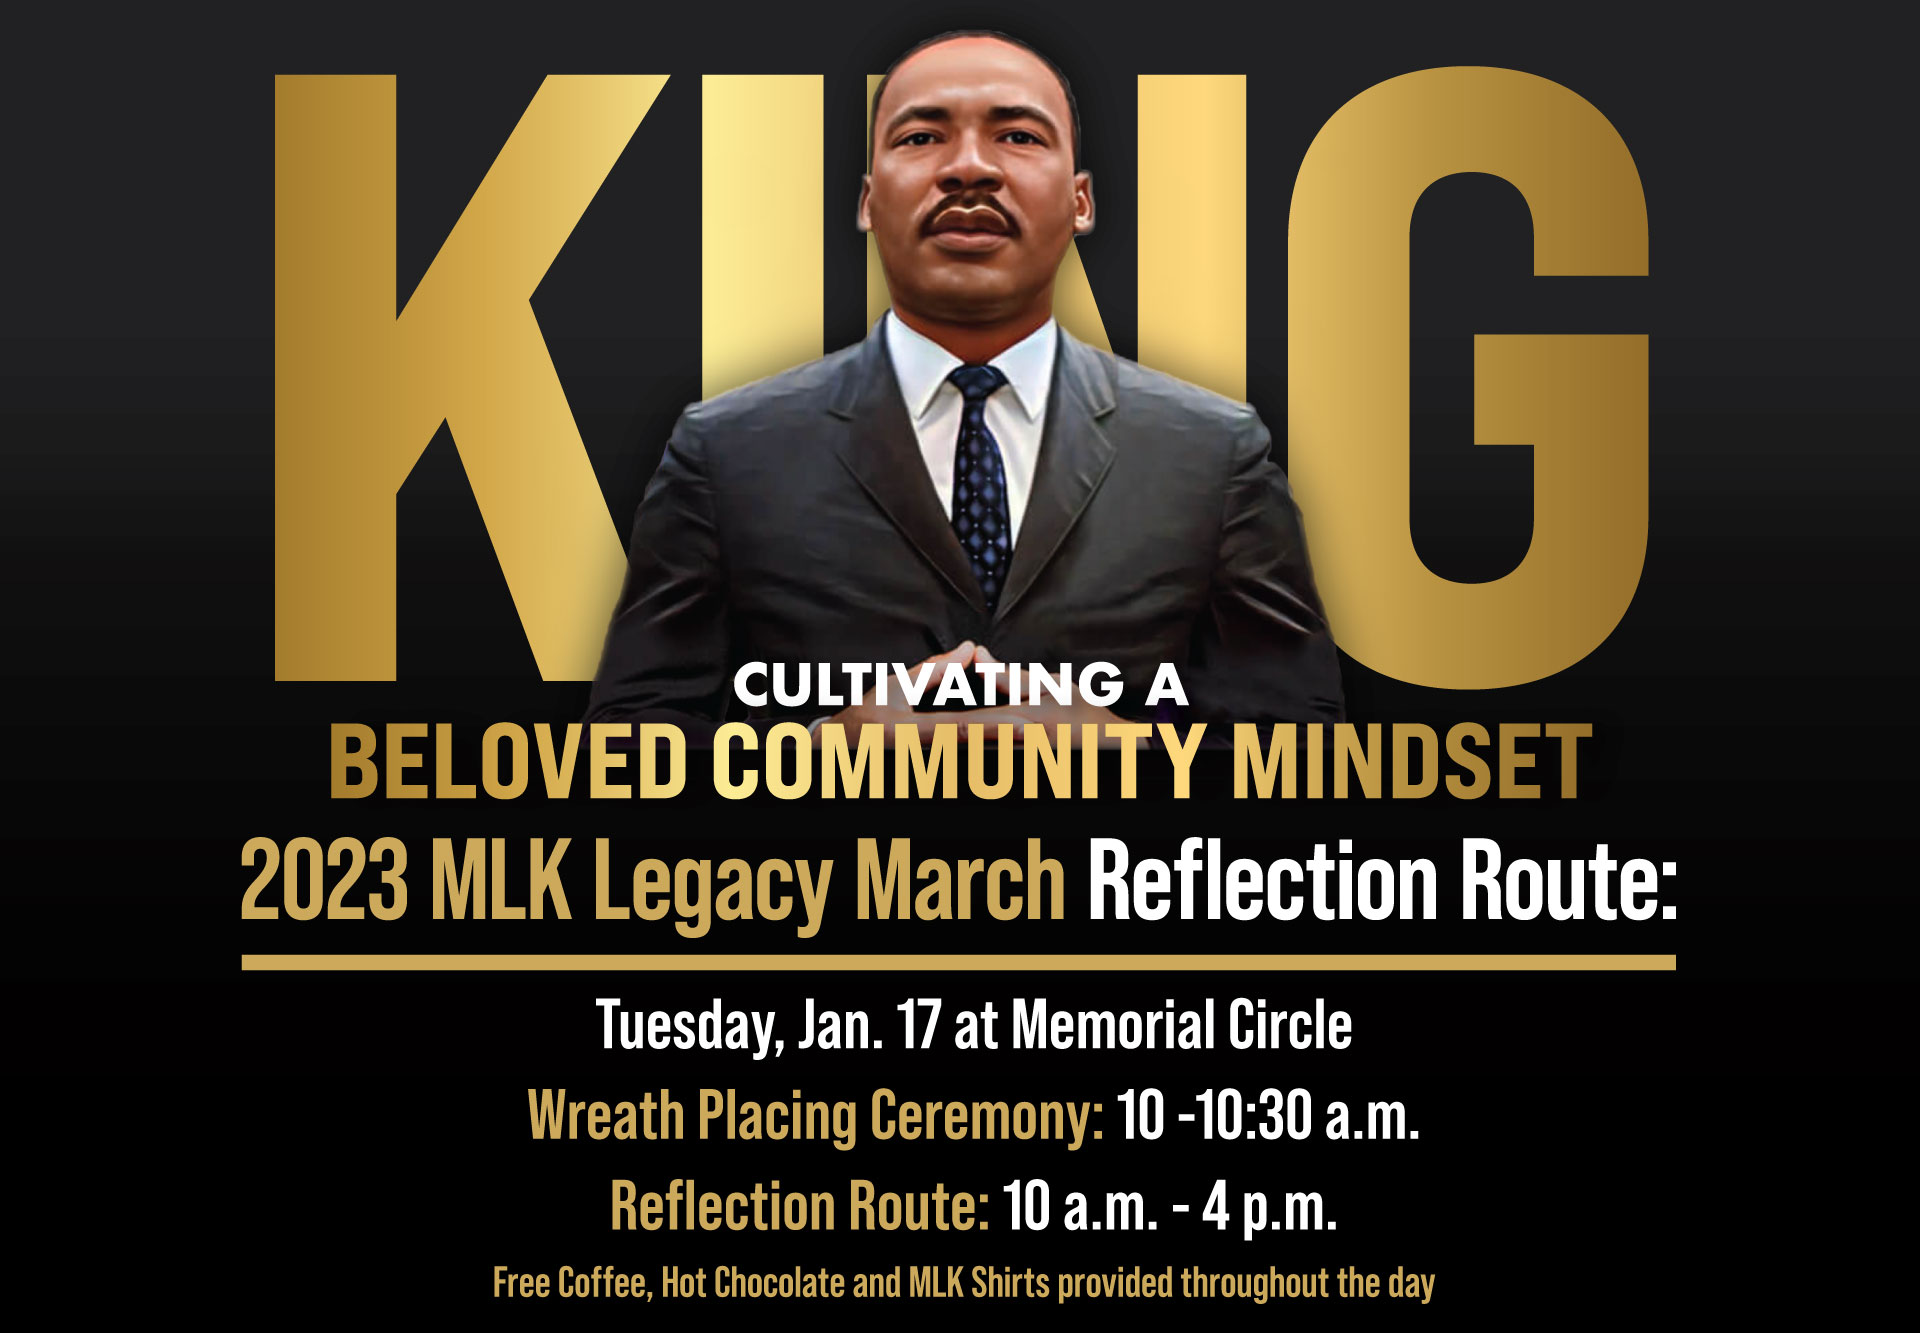 Mlk Reflection Route details